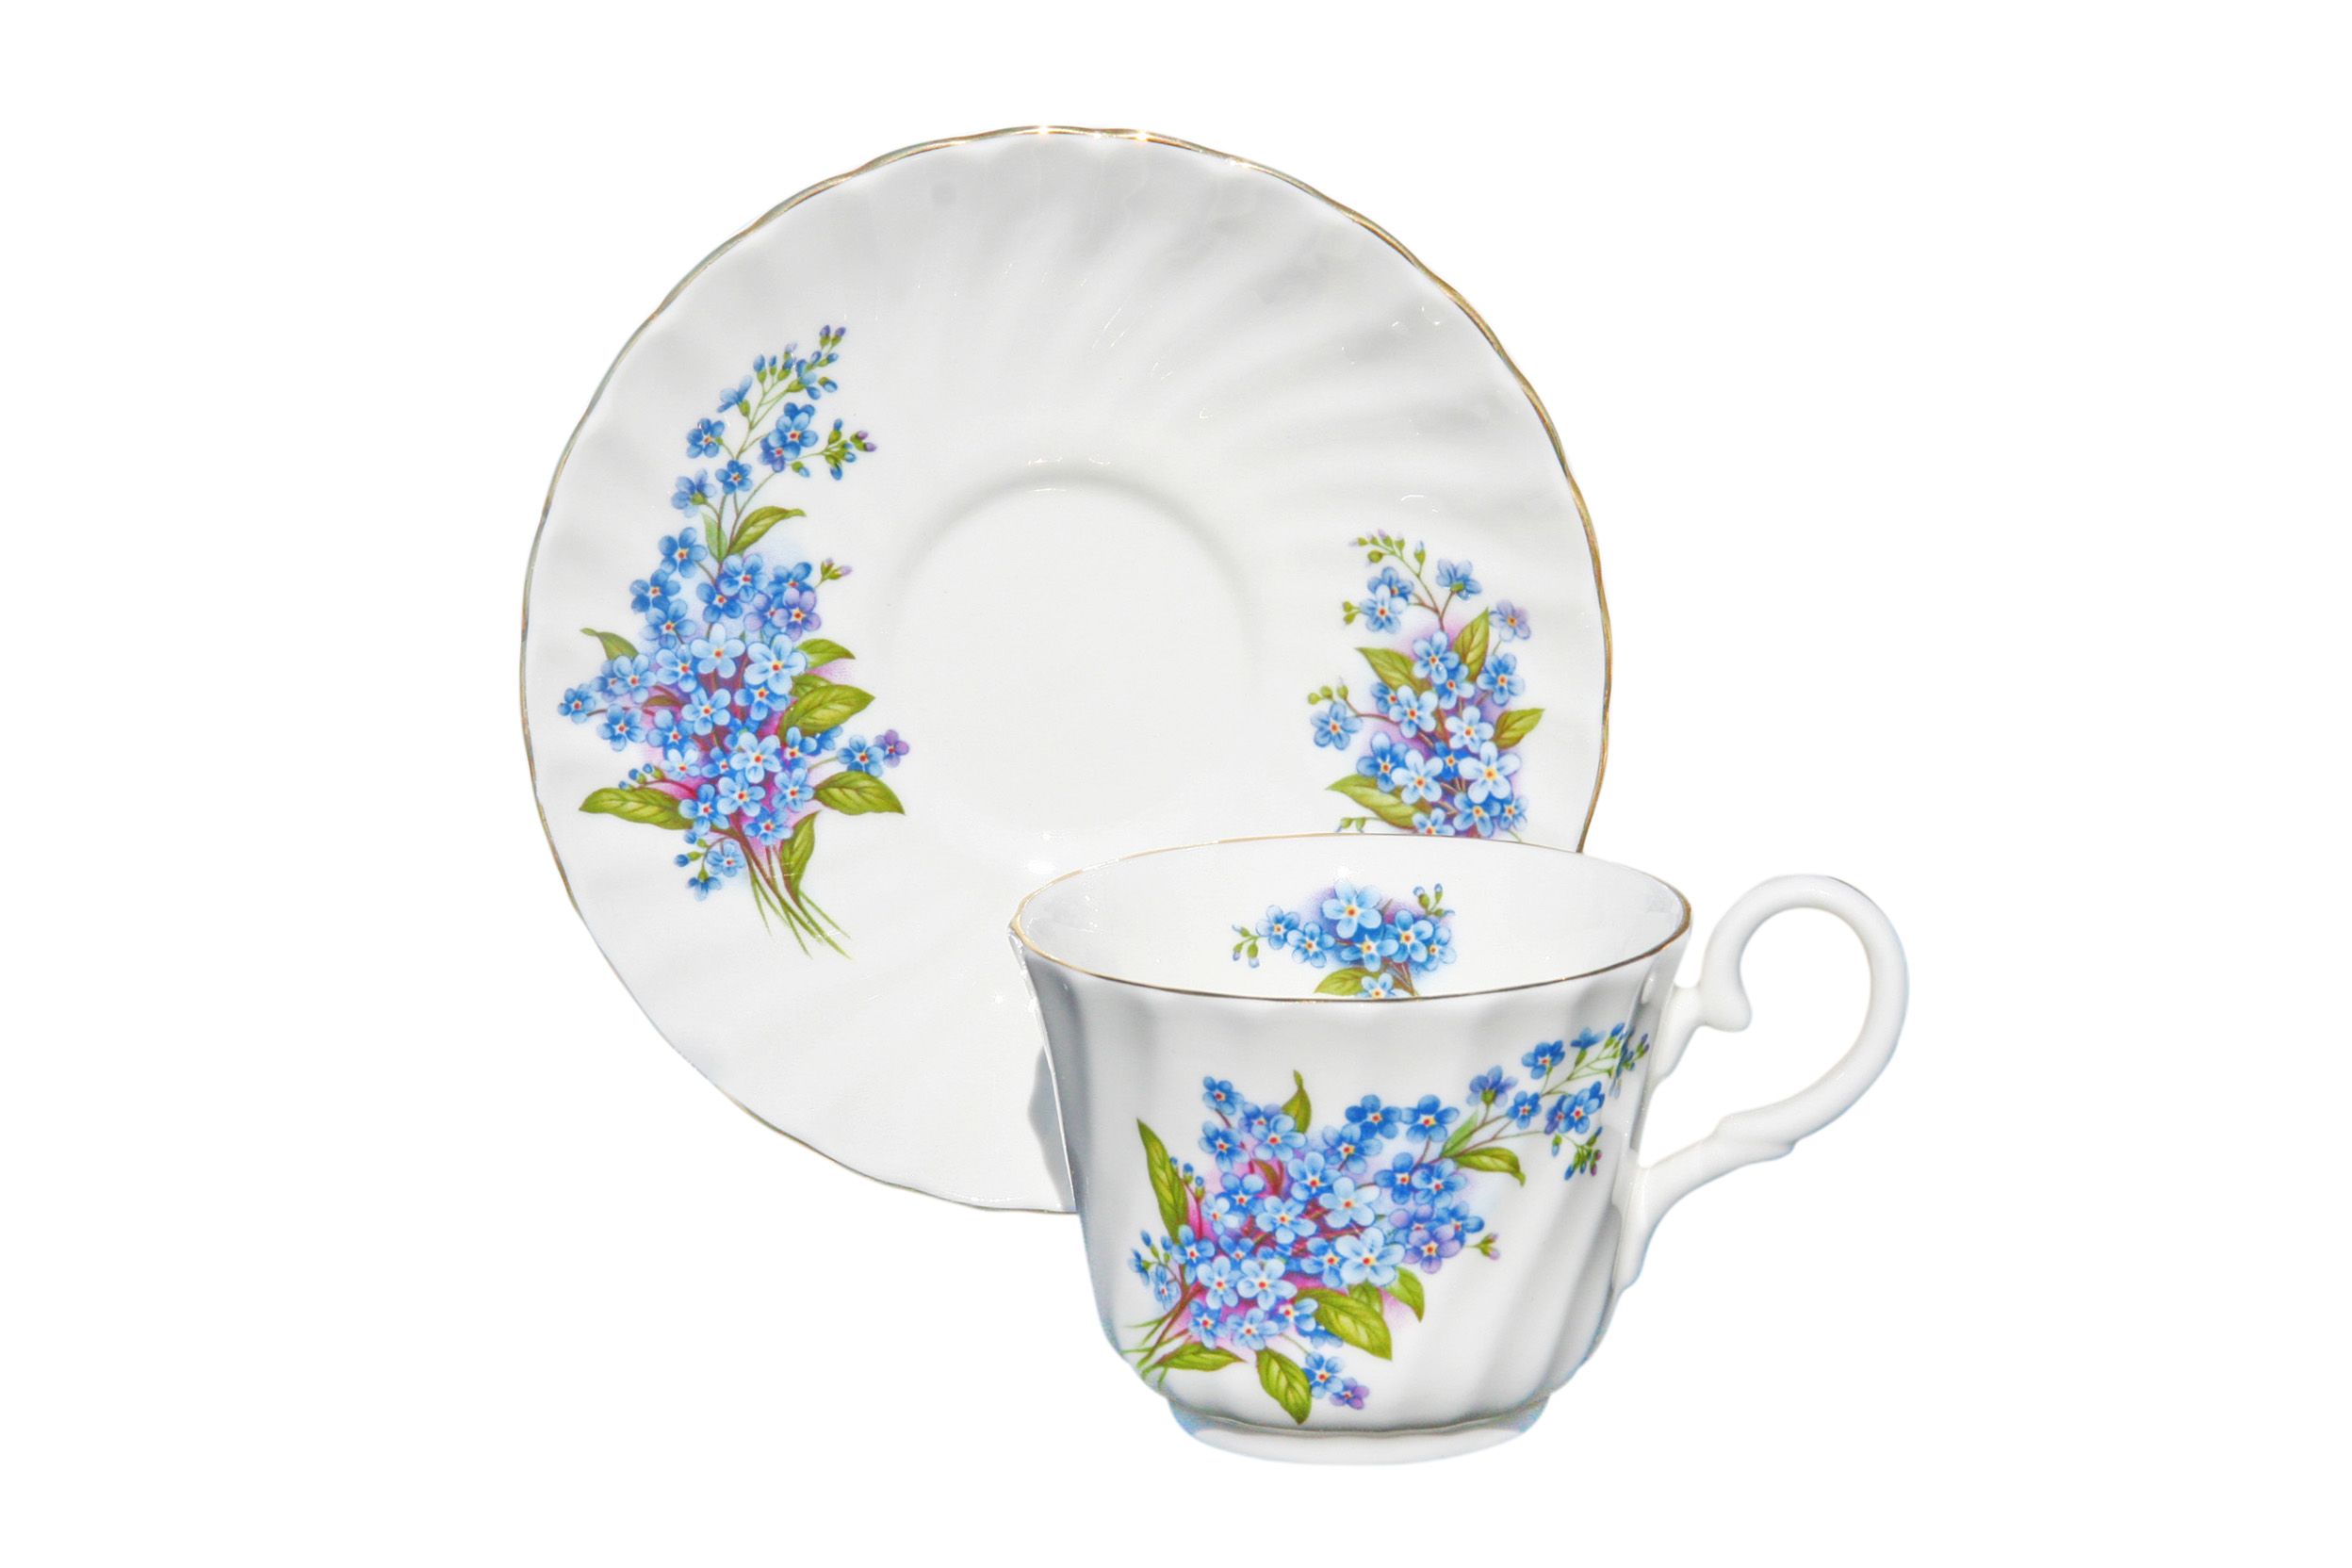 Forget Me Not 1 Cup and Saucer Set